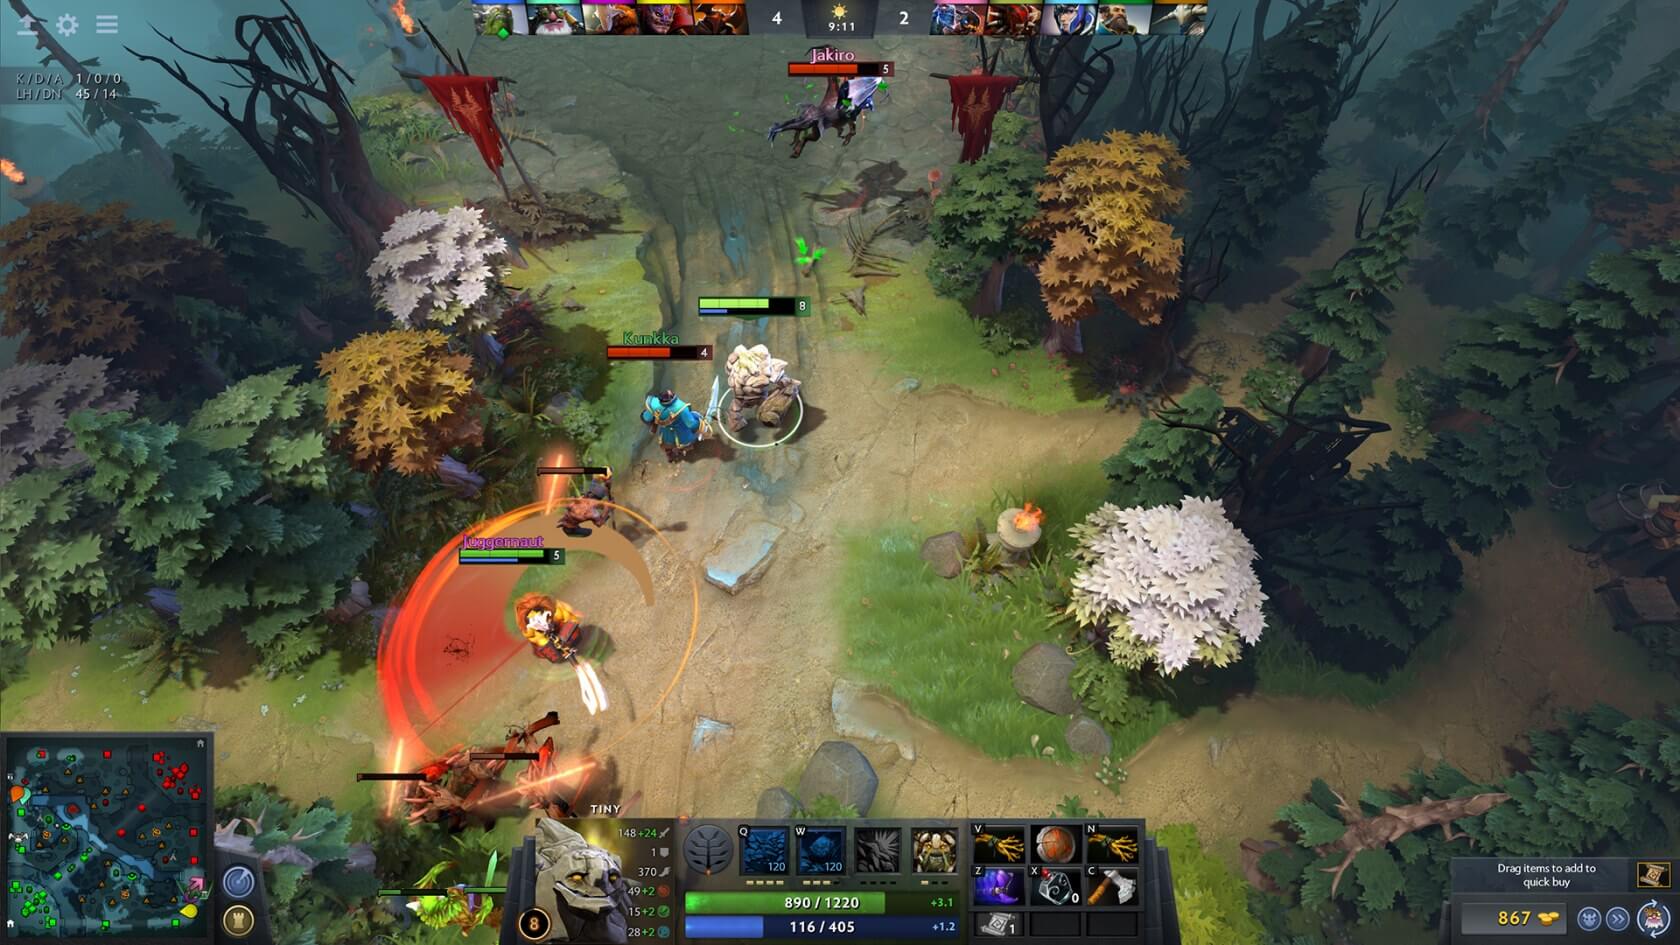 Valve is reportedly slapping misbehaving DOTA 2 players with 19-year bans